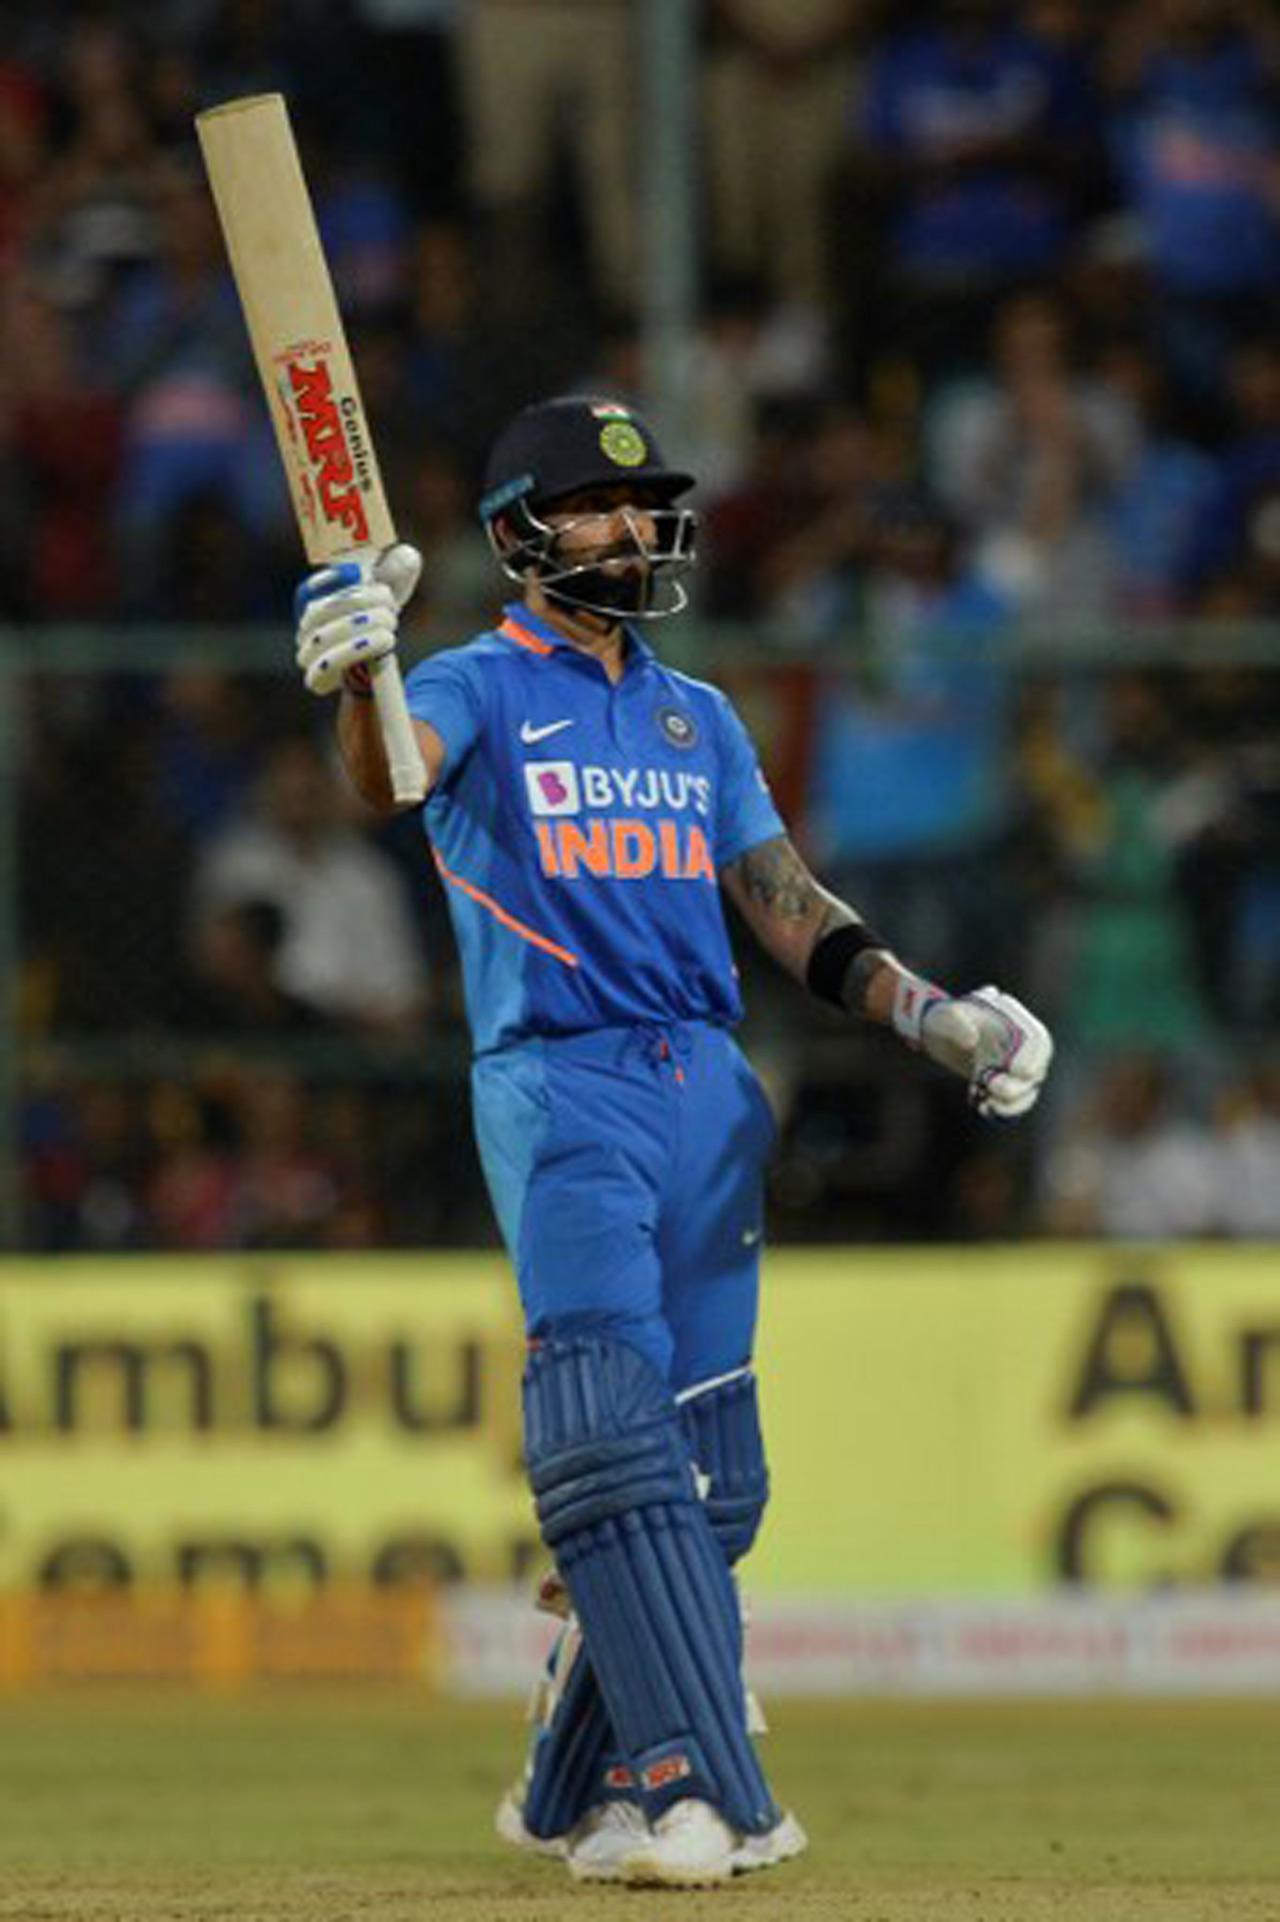 During the third ODI match between India and Australia on January 19, 2020, India skipper Virat Kohli set the record for the fastest batsman to score 5,000 runs as a captain of an ODI team. Virat achieved this feat in 82 innings. Kohli broke the previous record which was set by former India captain MS Dhoni (127 innings).